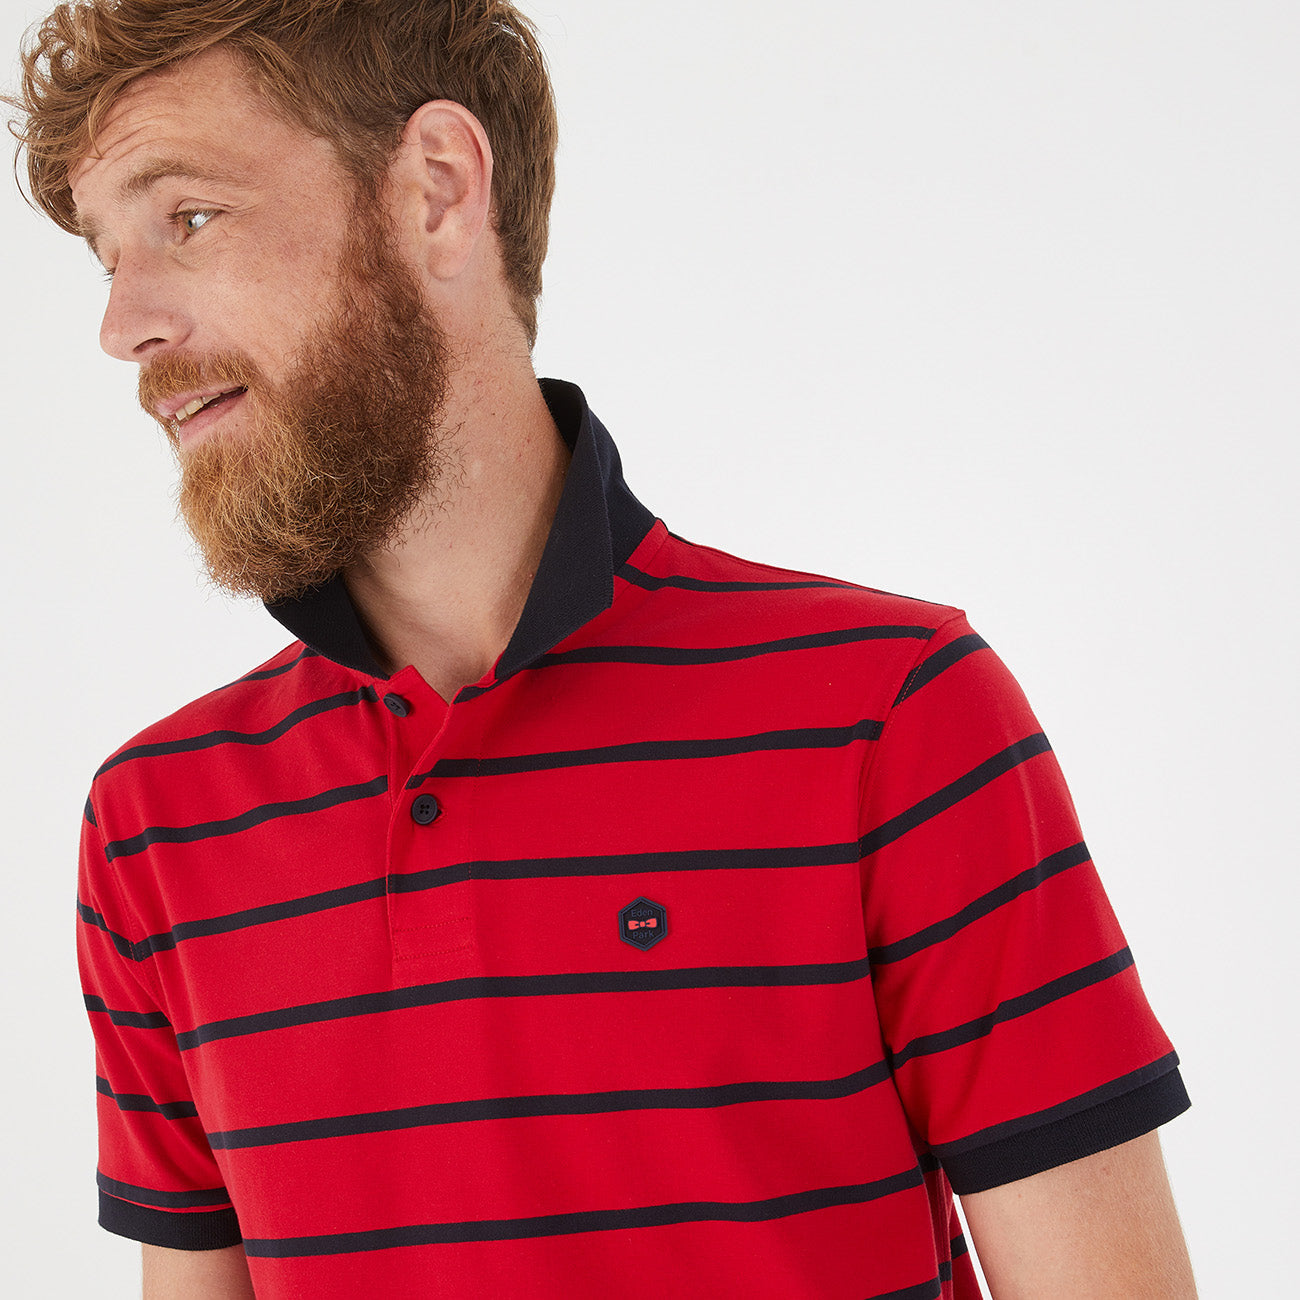 Eden Park Classic Red Striped Poloshirt with short sleeves and a classic collar poloshirt made from soft cotton pique. Available at StylishGuy Menswear Boutique Dublin.